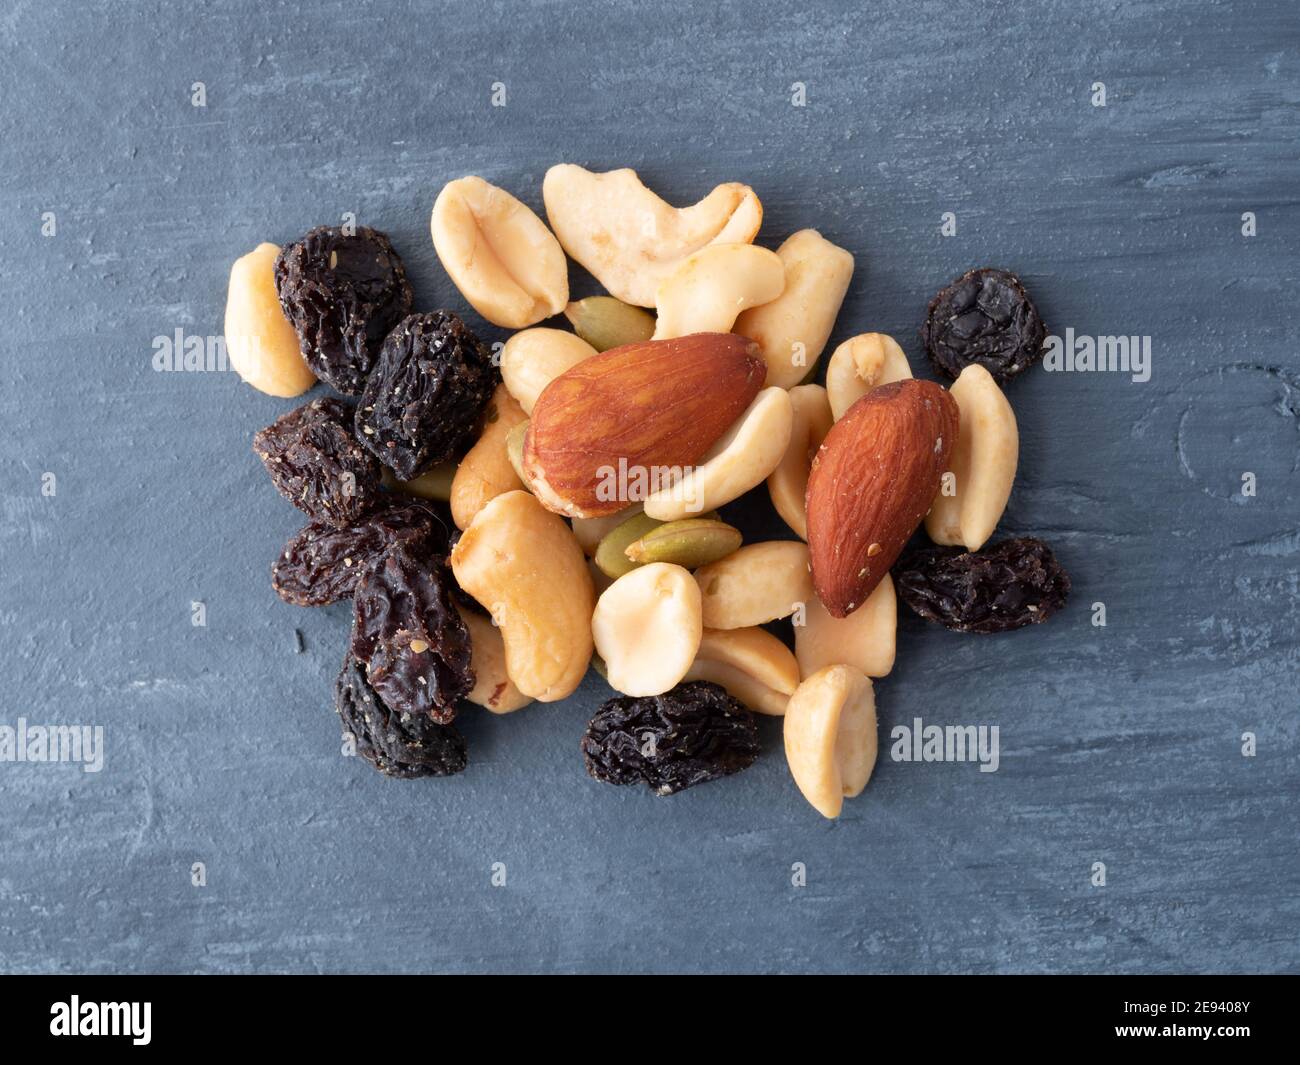 Top view of a portion of nuts and dried fruit on a blue painted wood background. Stock Photo